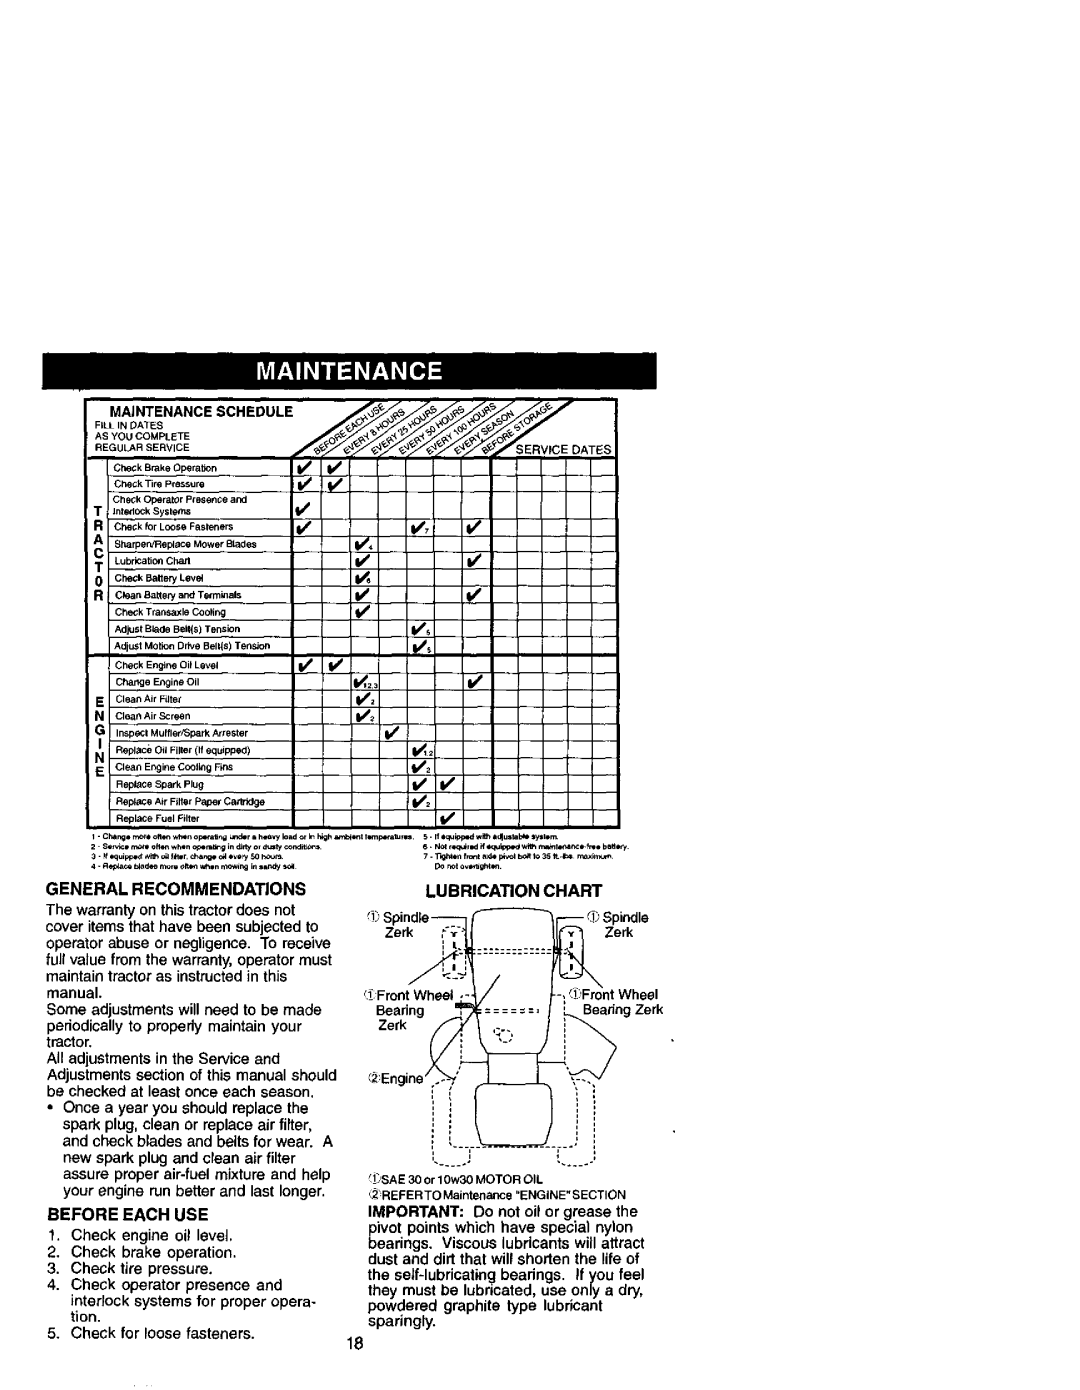 Craftsman 917.271641 owner manual Lubrication Chart, Maintenance Schedule, General Recommendations, Before Each Use, Zerk 